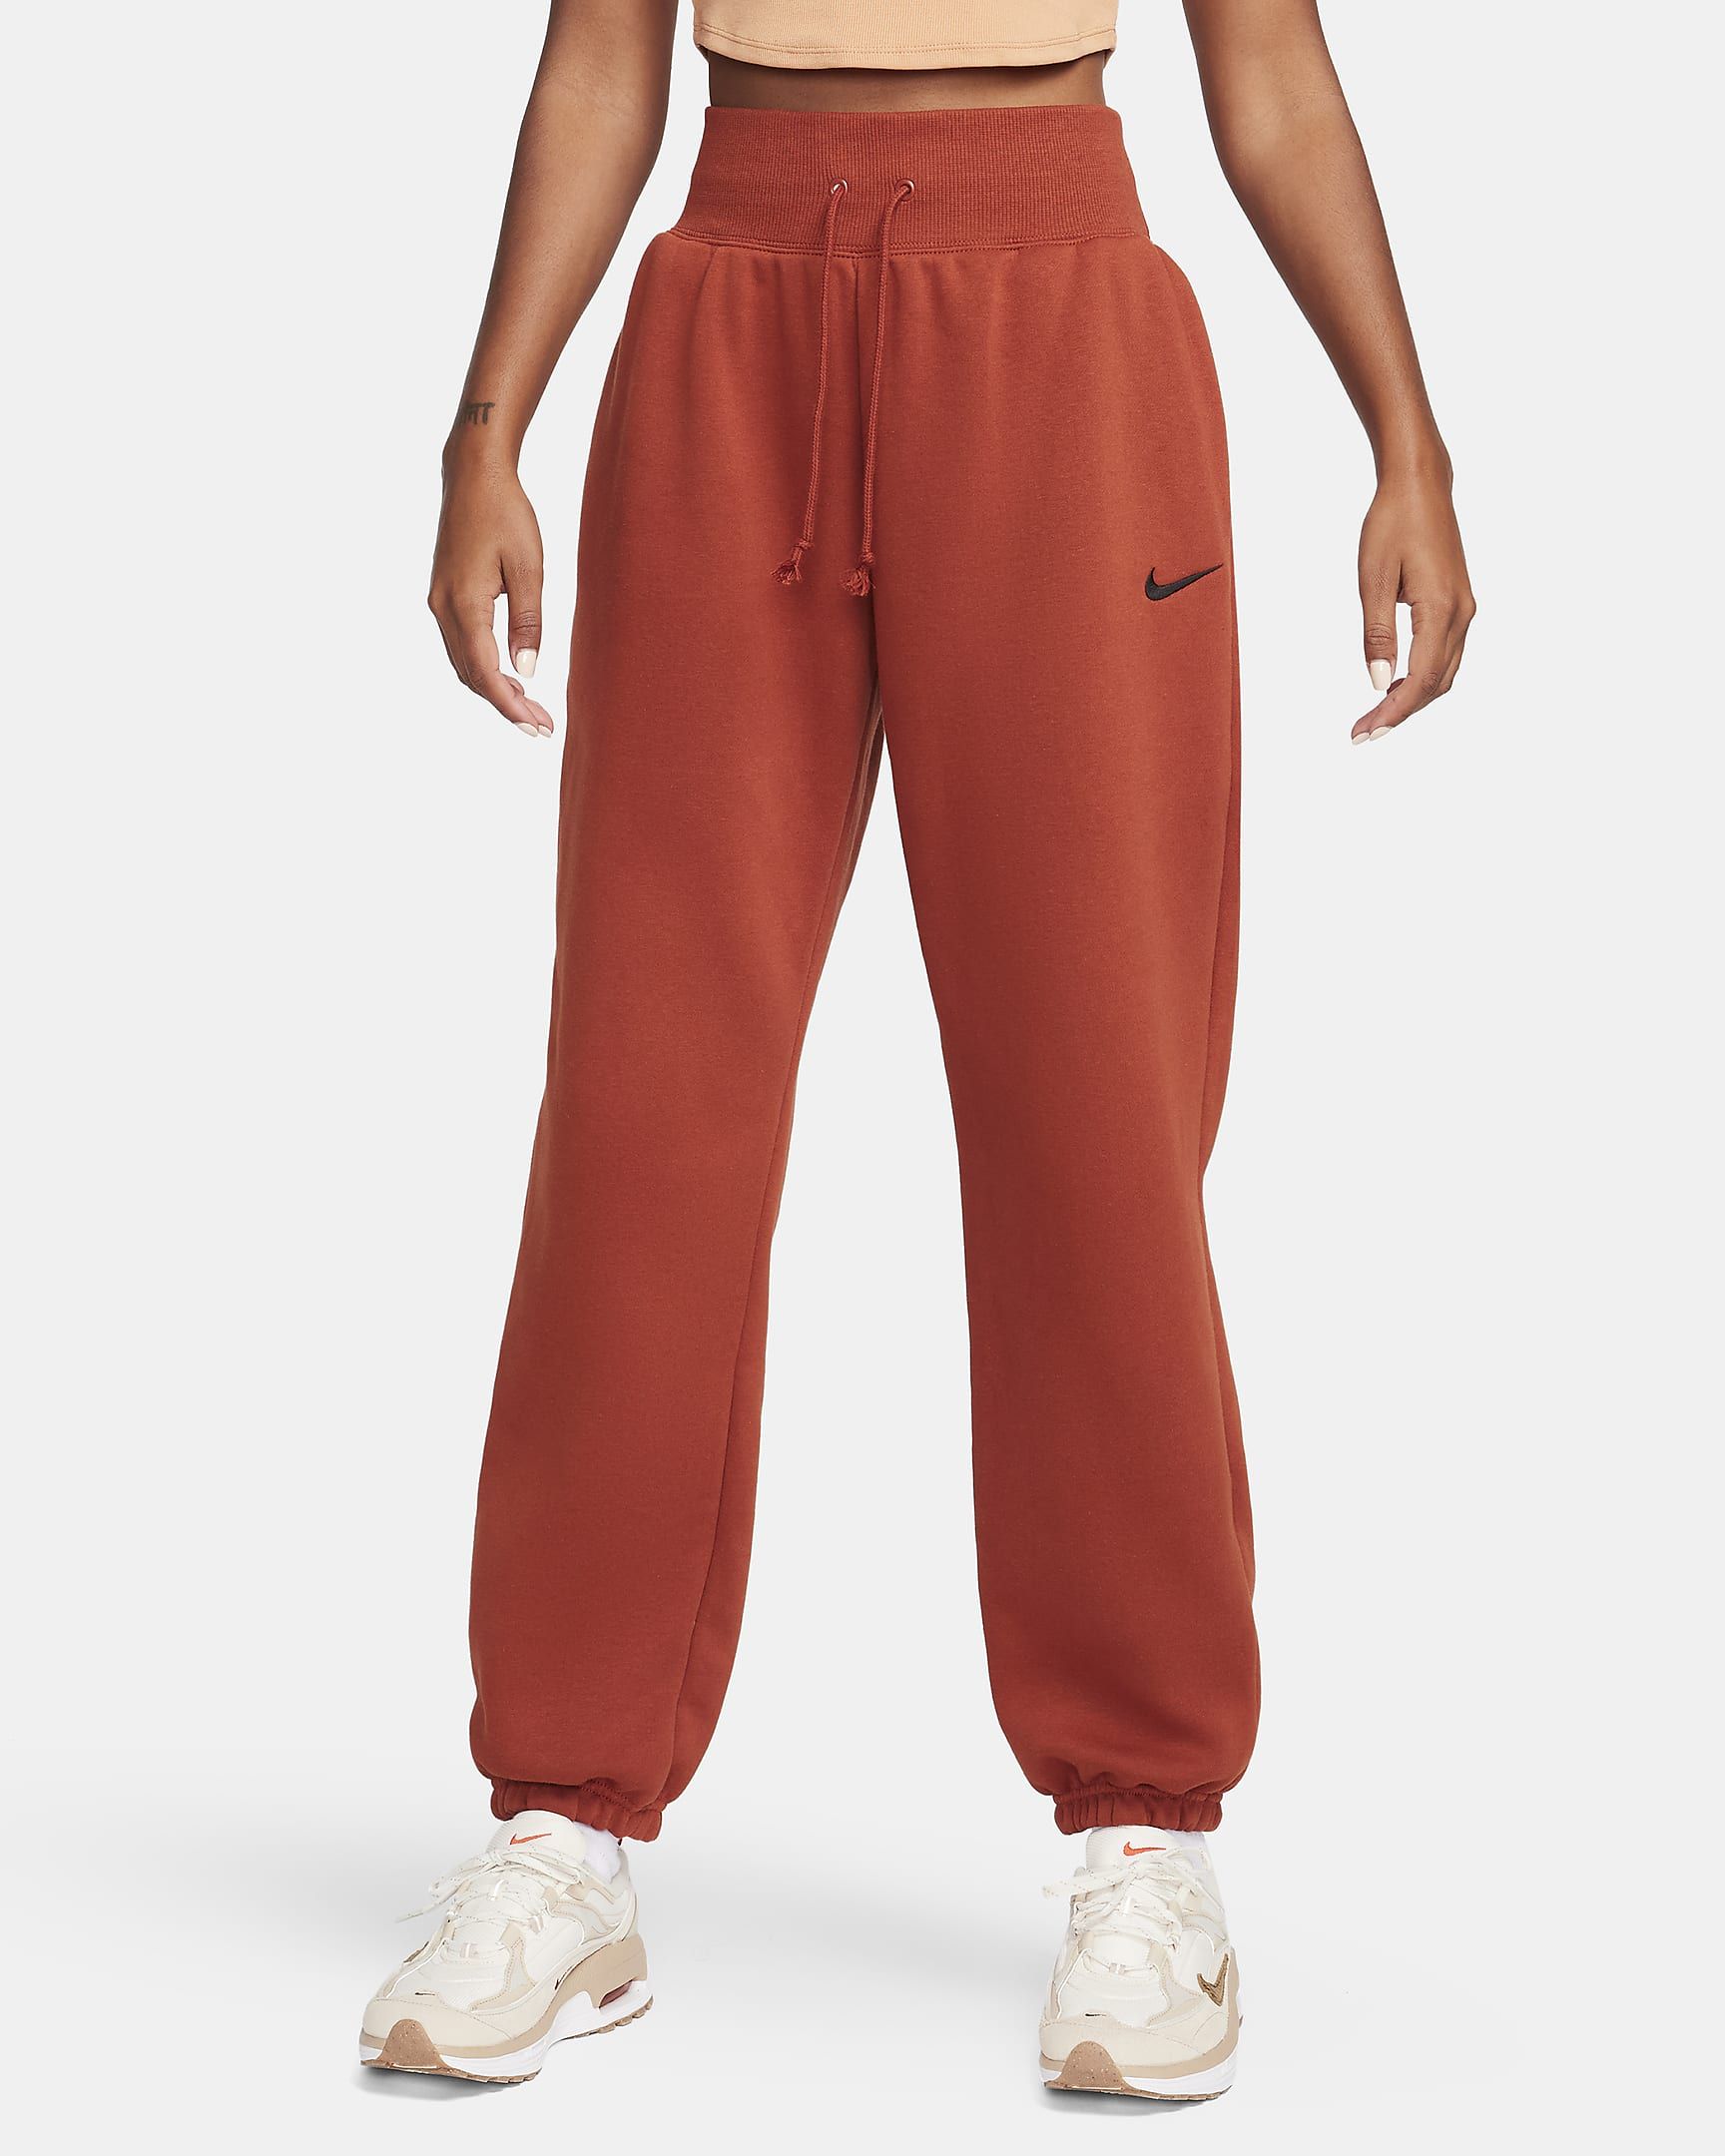 Women's High-Waisted Oversized Tracksuit Bottoms | Nike (EE)